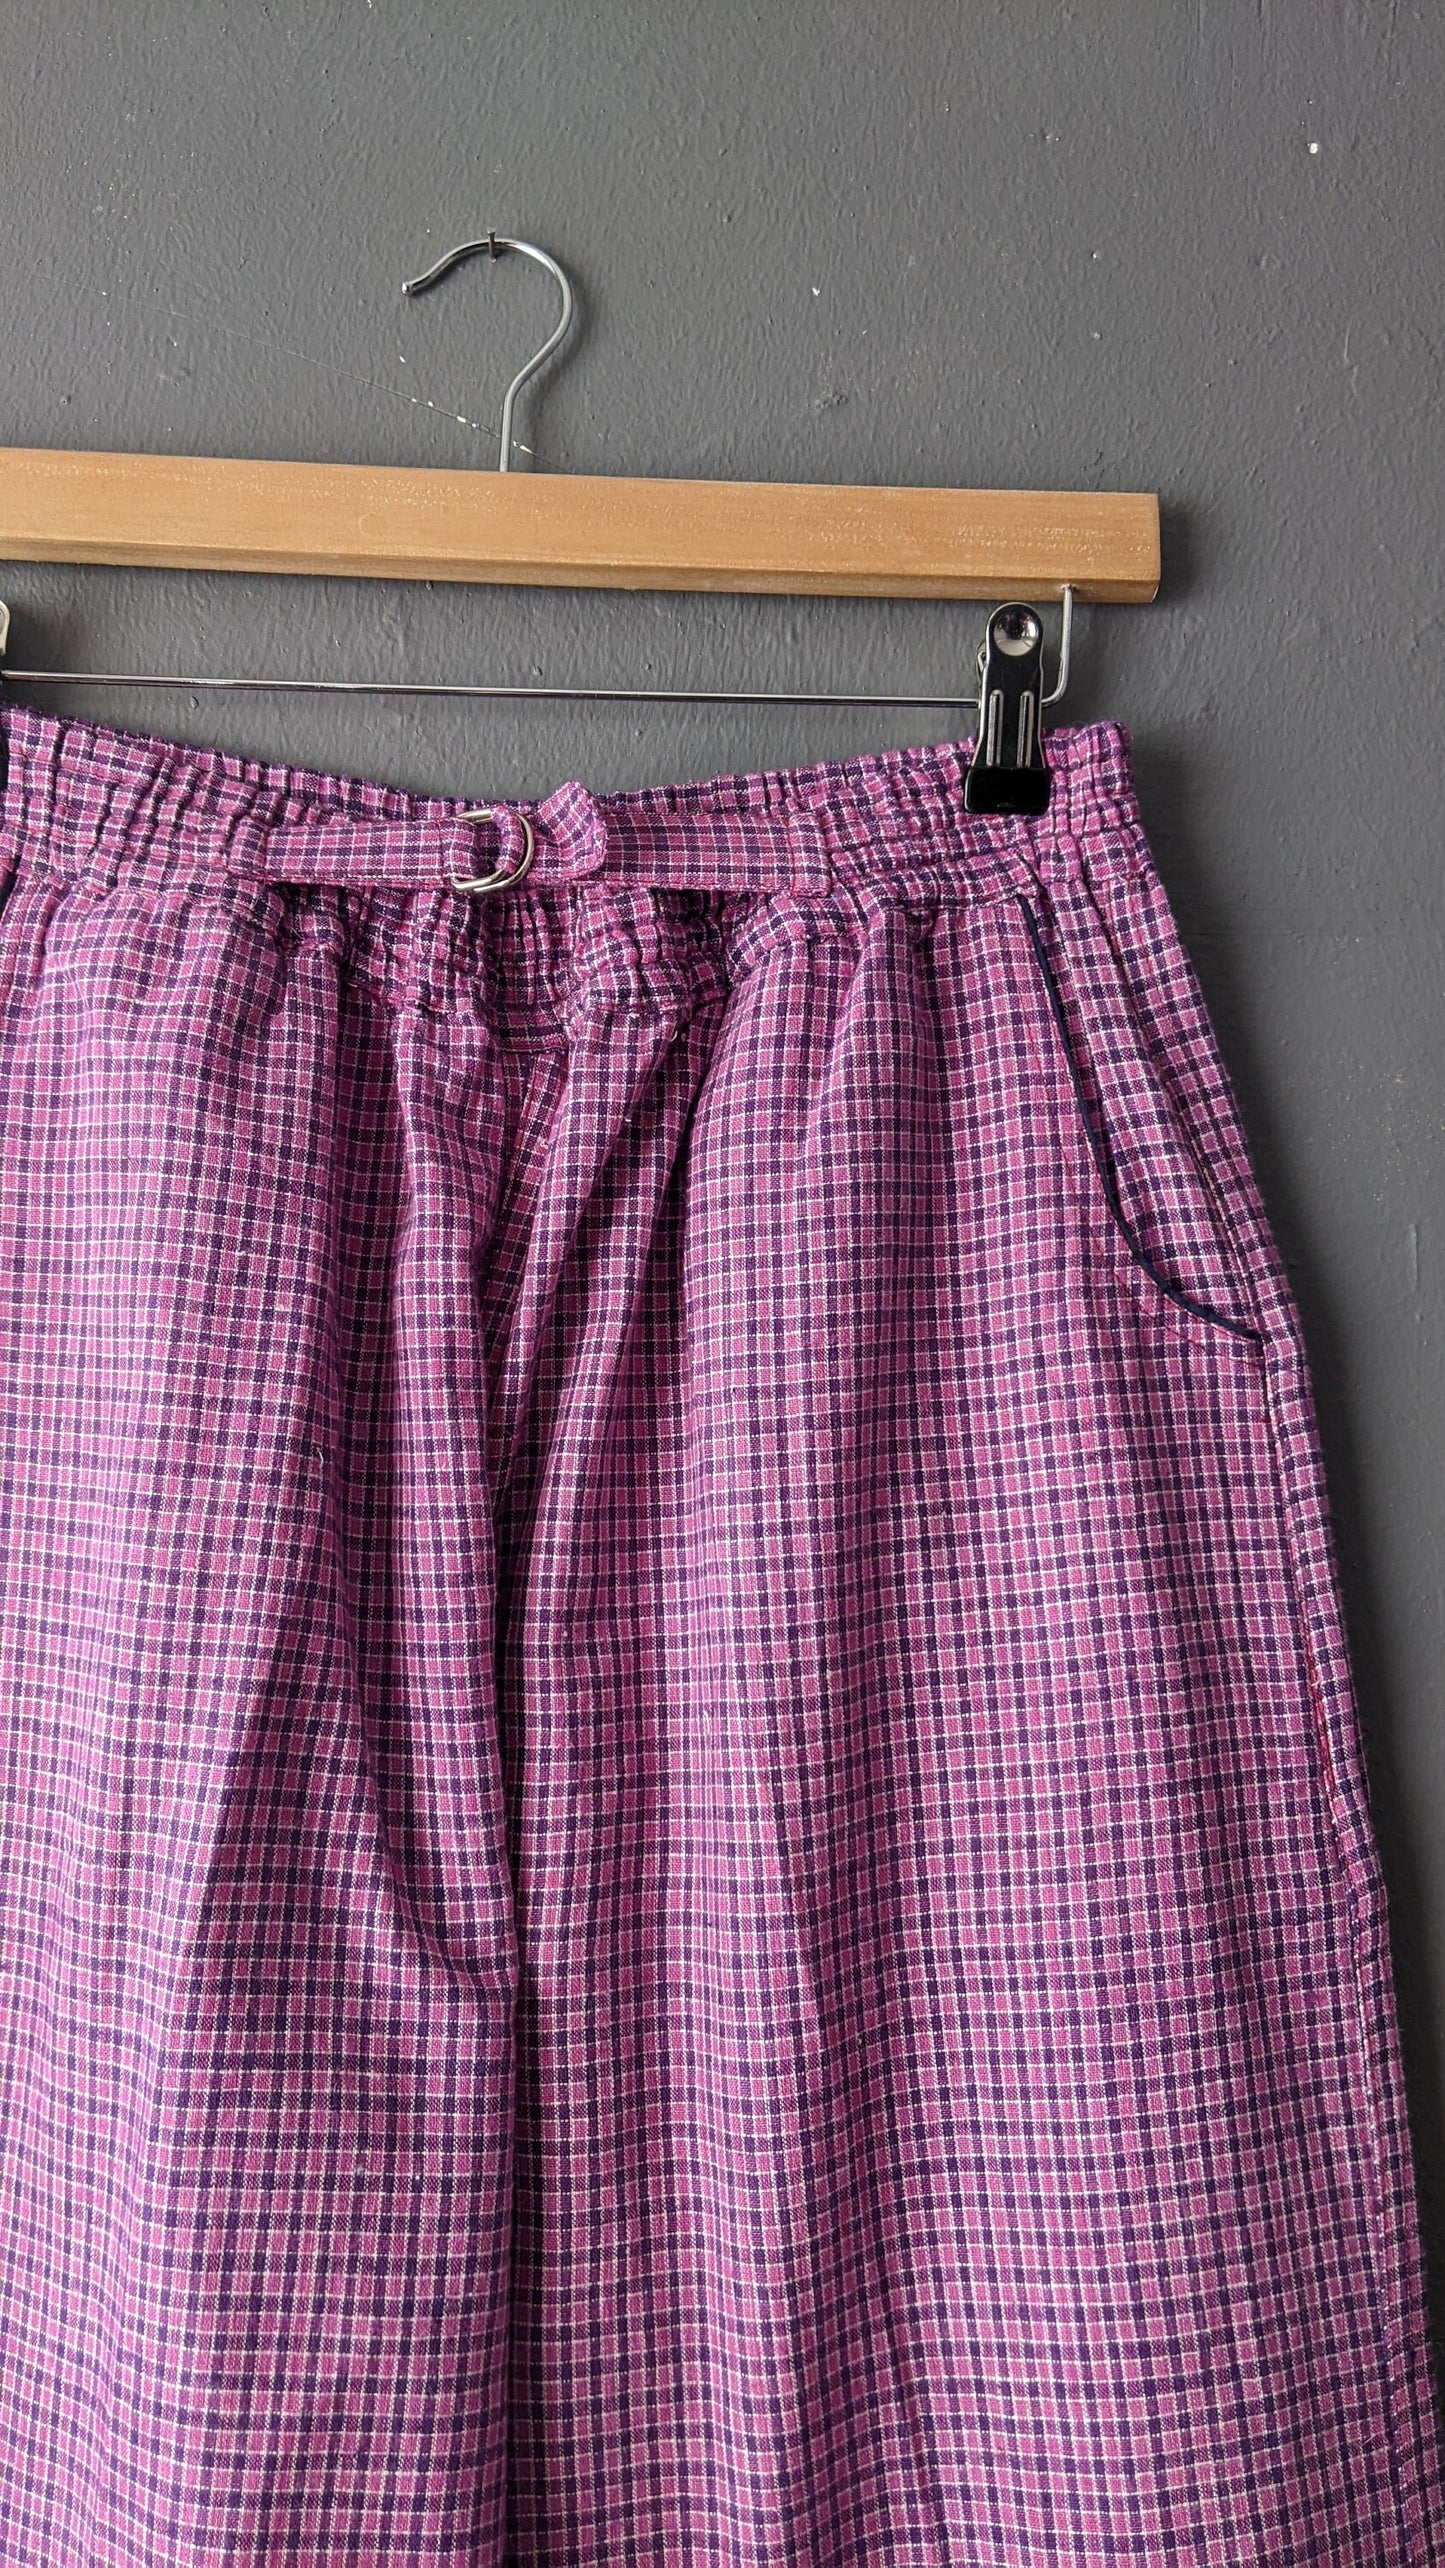 80s Pink and Purple Check Trousers, Cotton Tapered Fit, Size Medium